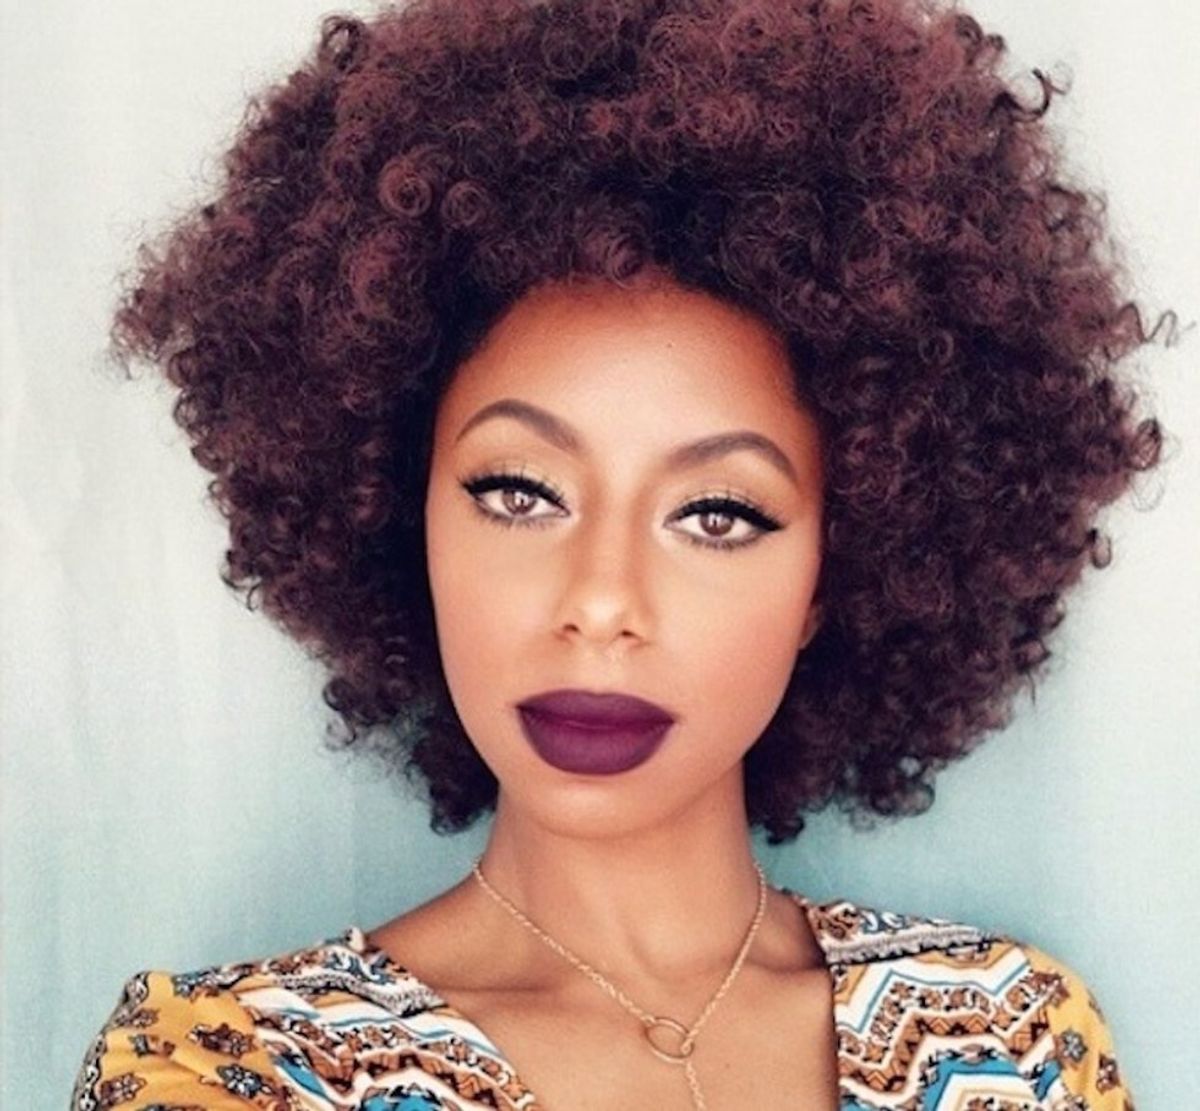 5 Things You Should Know About Black Girls And Their Hair